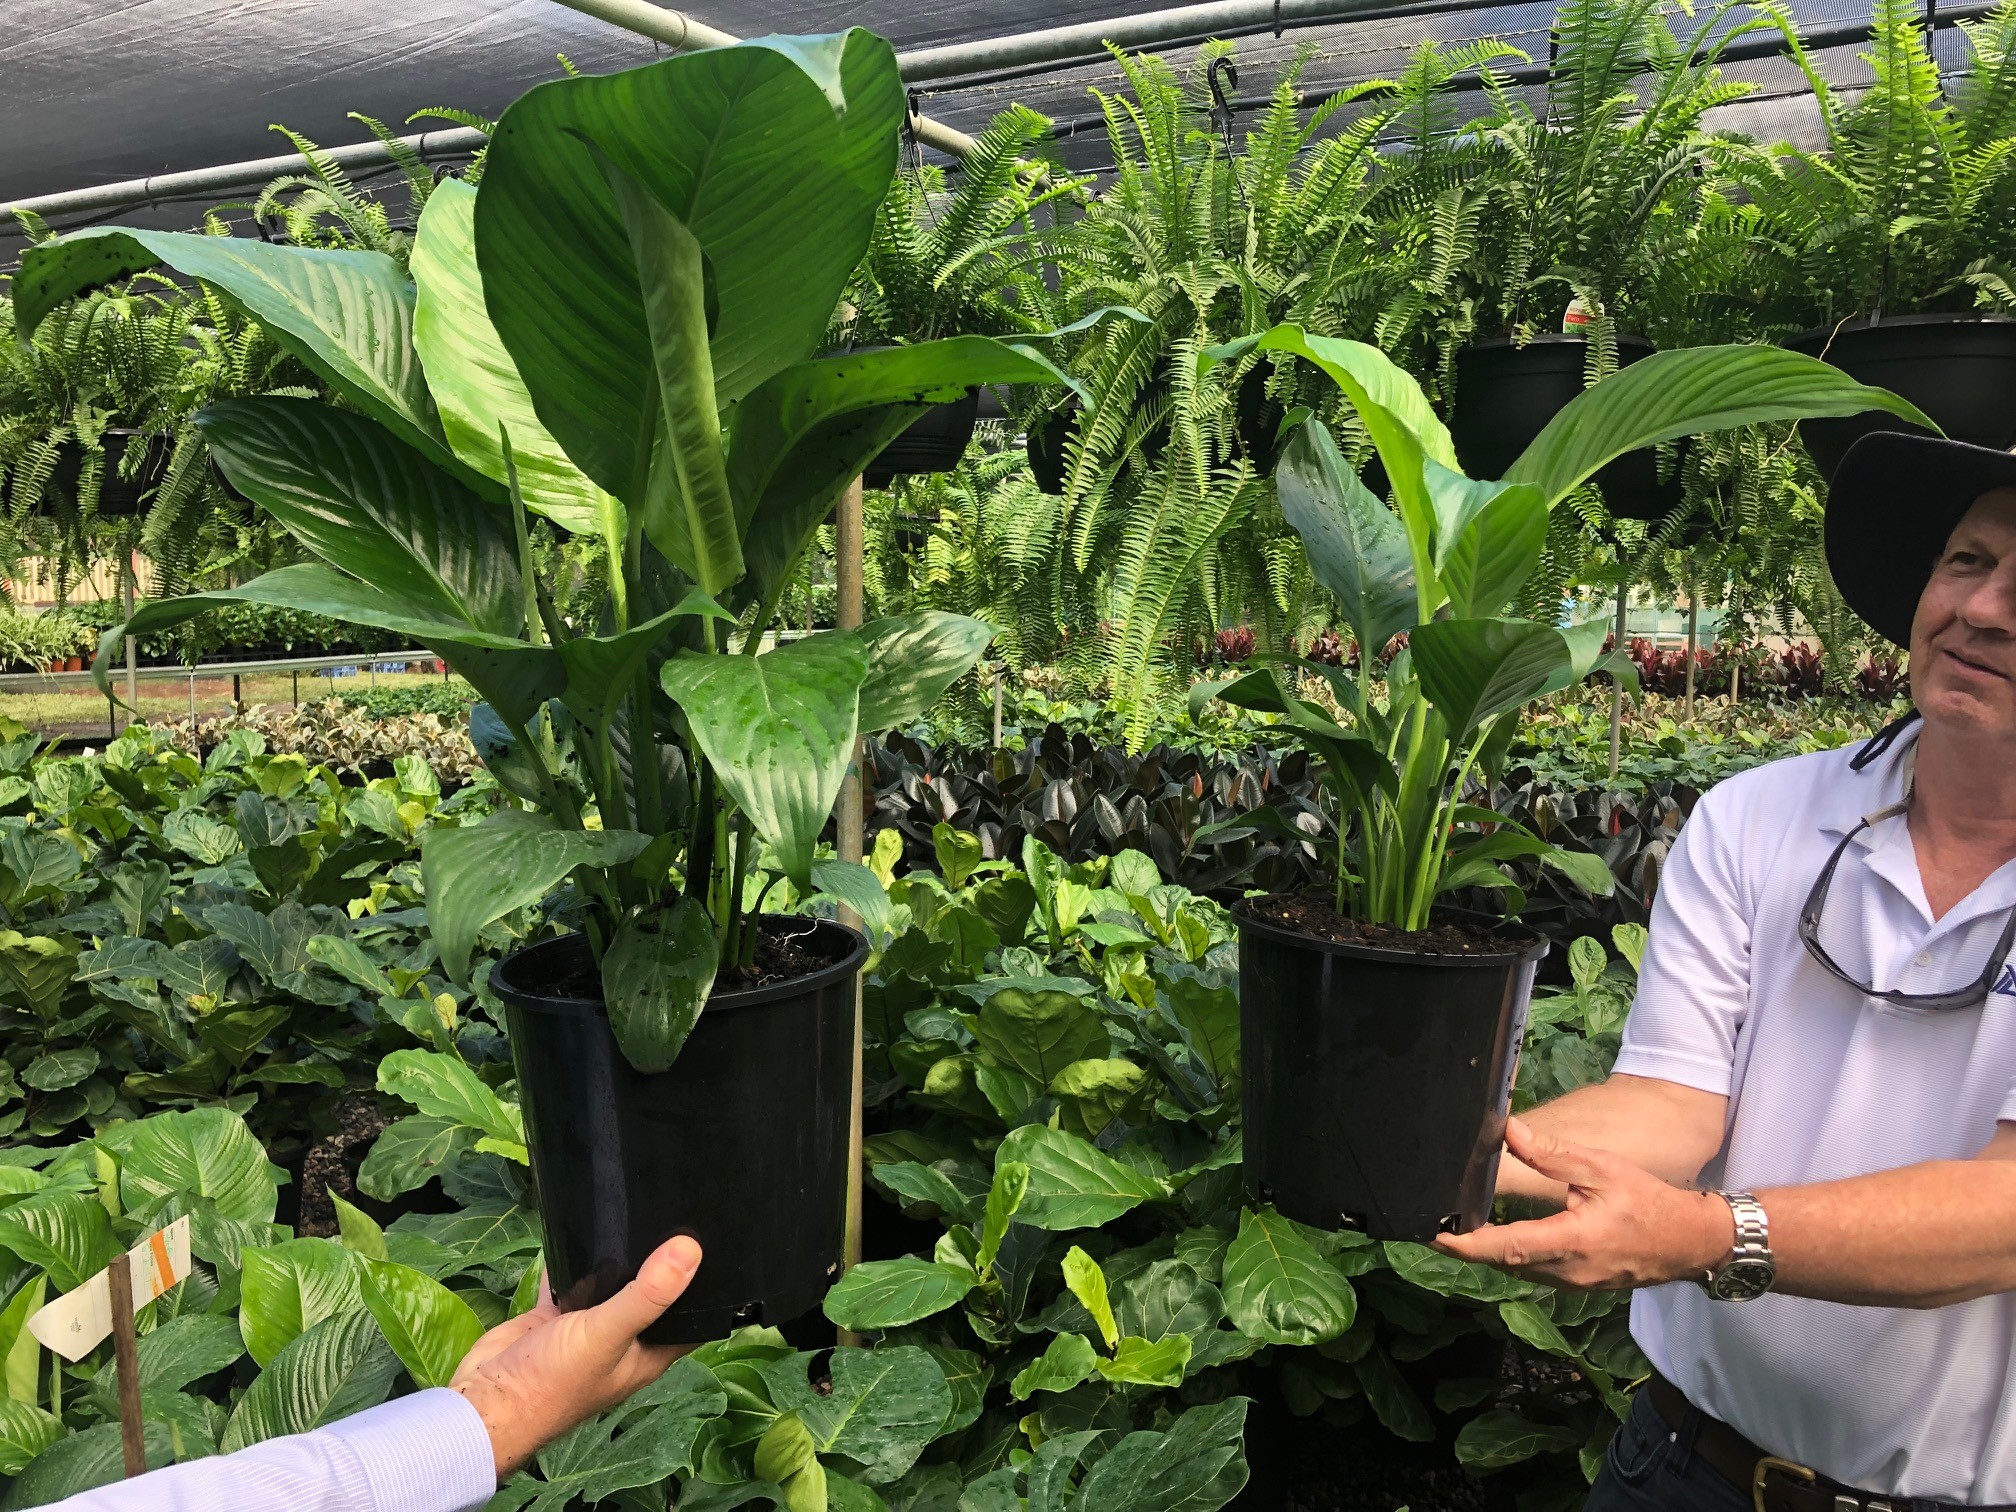 Robert Megier from ICL in the field conducting a trial on Osmocote with Spathiphyllum spp. (Image: ICL)